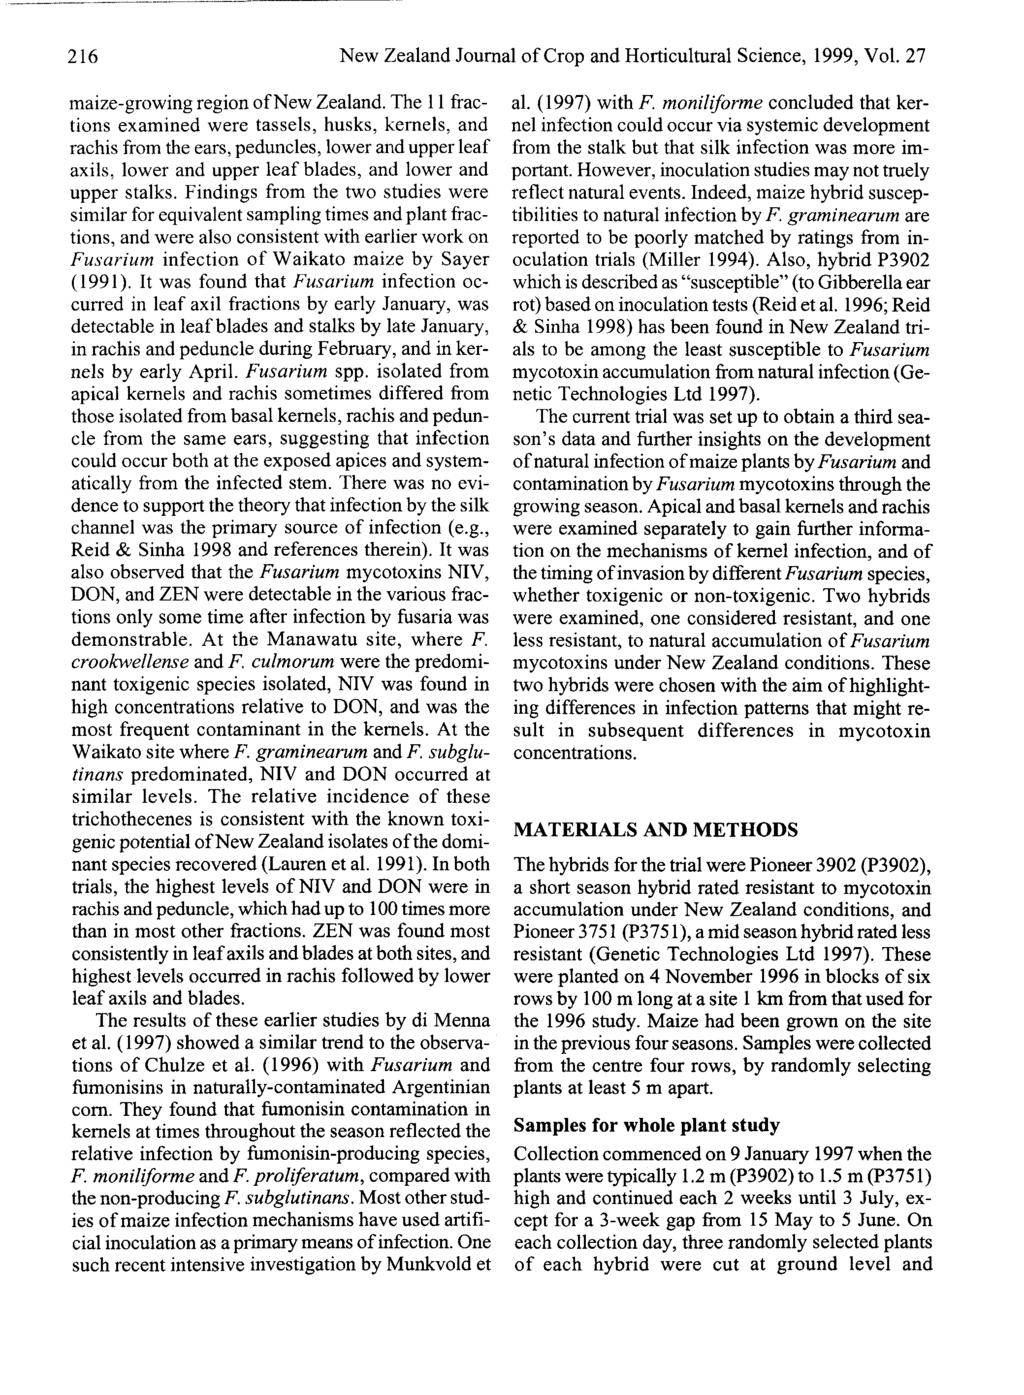 216 New Zealand Journal of Crop and Horticultural Science, 1999, Vol. 27 maize-growing region of New Zealand.